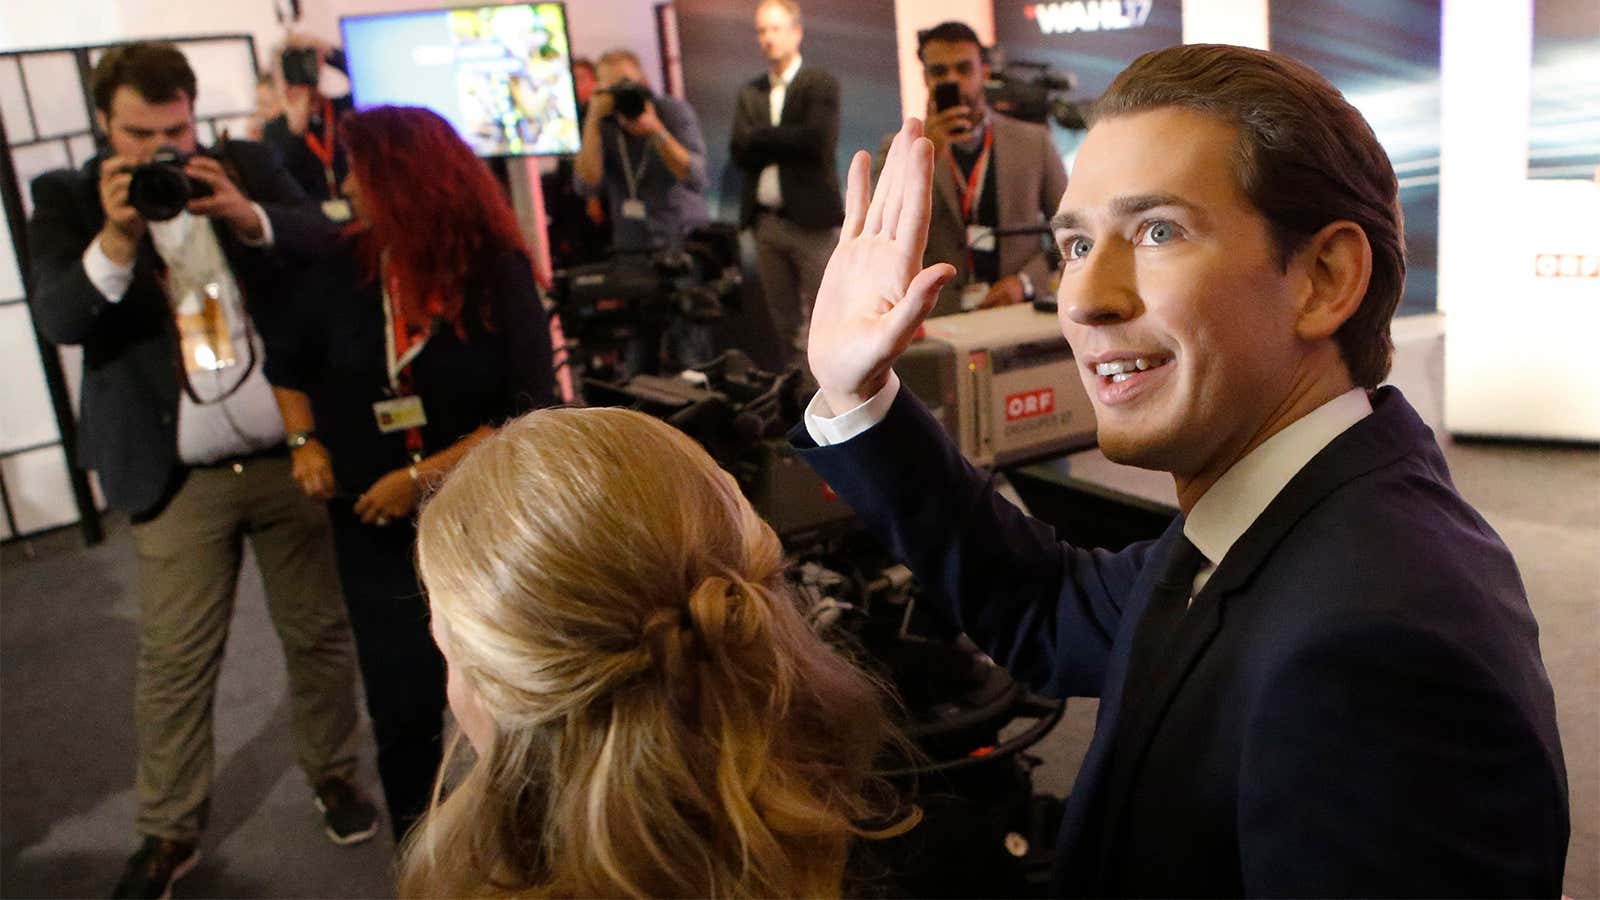 Top candidate of Peoples Party (OeVP) and Foreign Minister Sebastian Kurz arrives for the first TV statements after Austria’s general election in Vienna, Austria, October 15, 2017. REUTERS/Heinz-Peter Bader – UP1EDAF1CJKTA